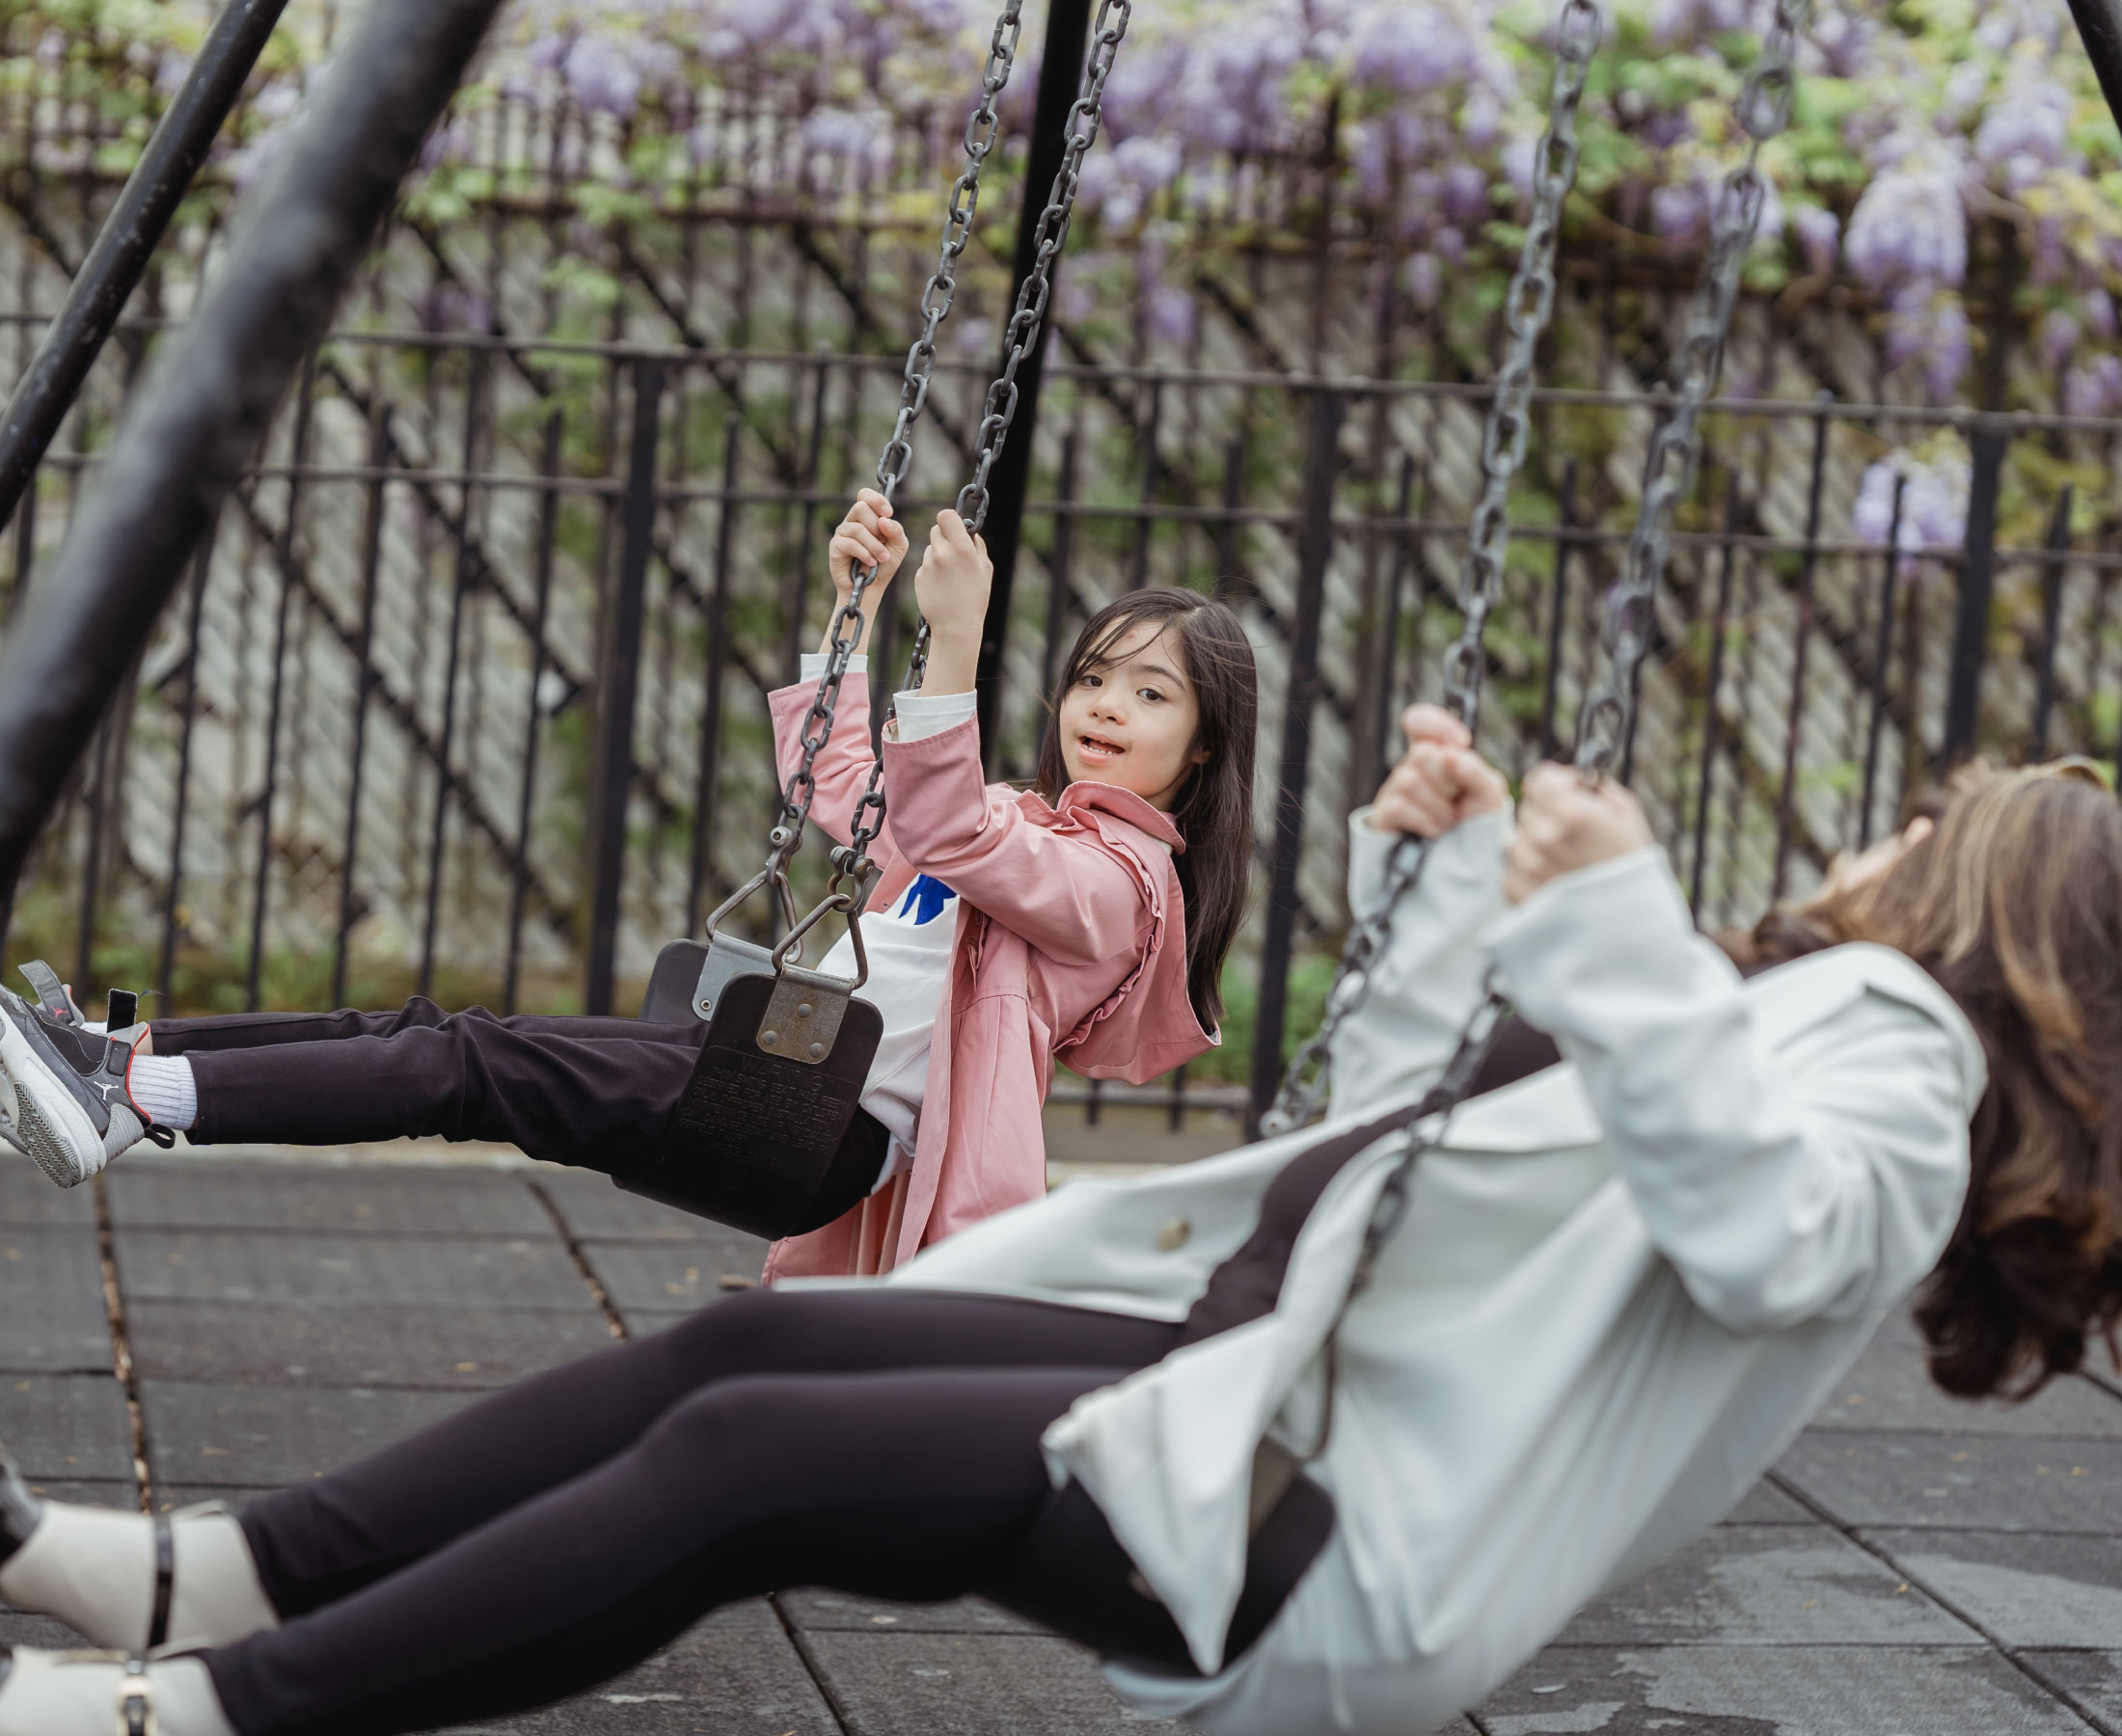 A young girl with special needs on a playground swing.